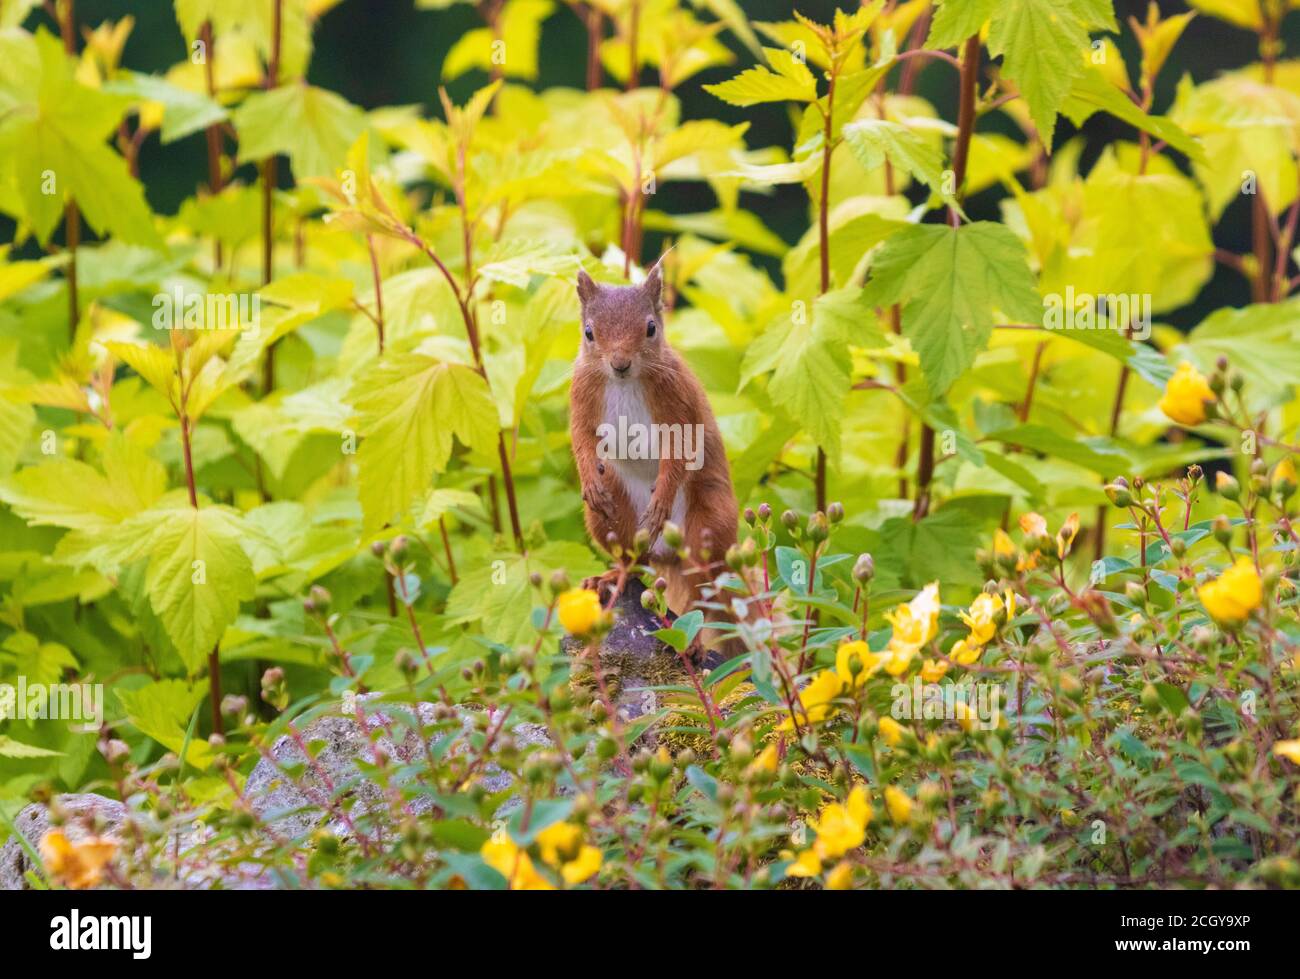 A red squirrel sitting on a garden wall, Scotland. Stock Photo